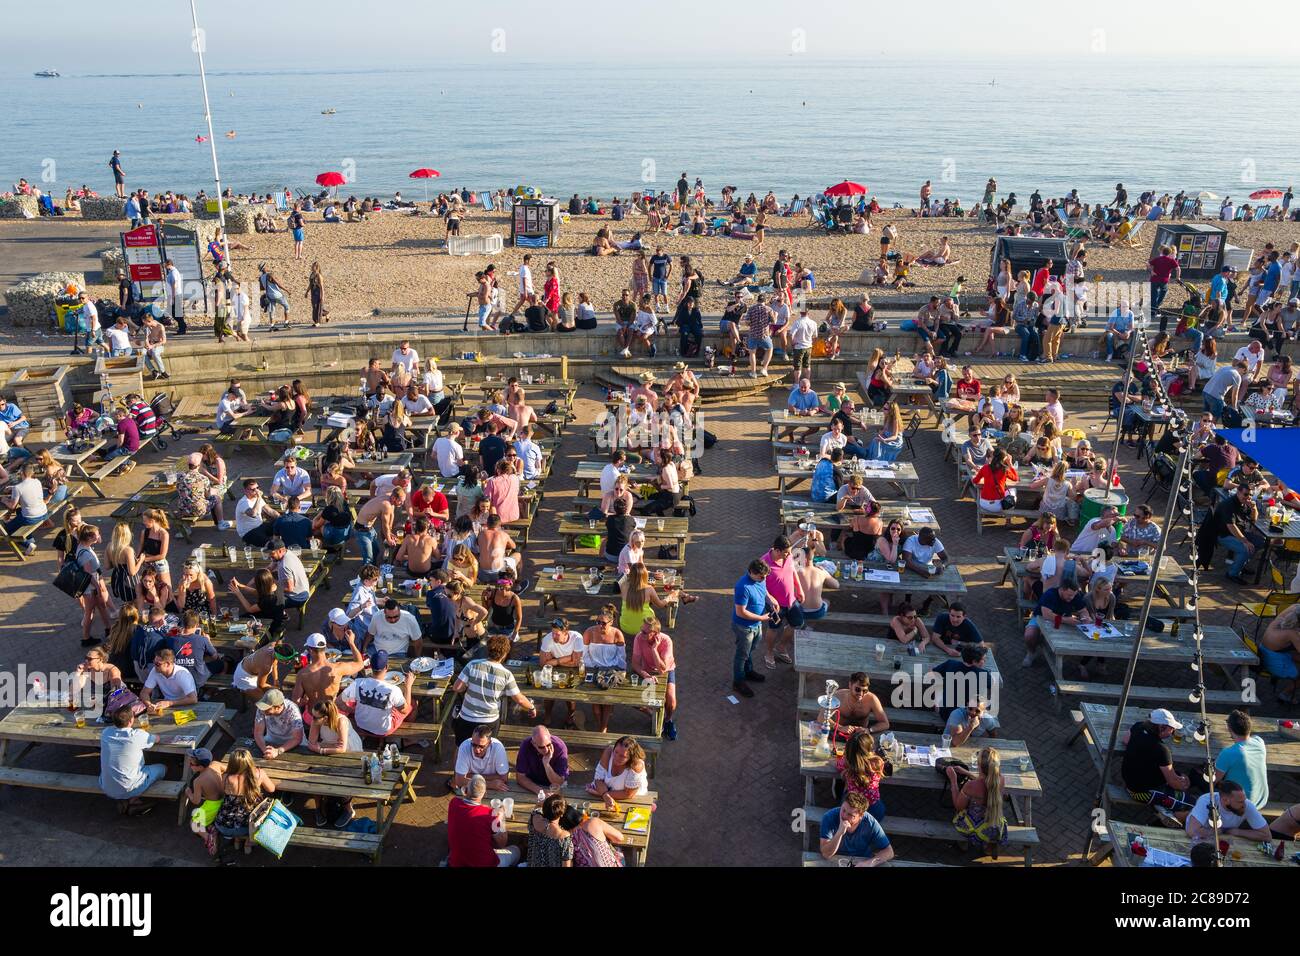 People having a good time drinking outside on UK Brighton beach in pre-Covid times Stock Photo